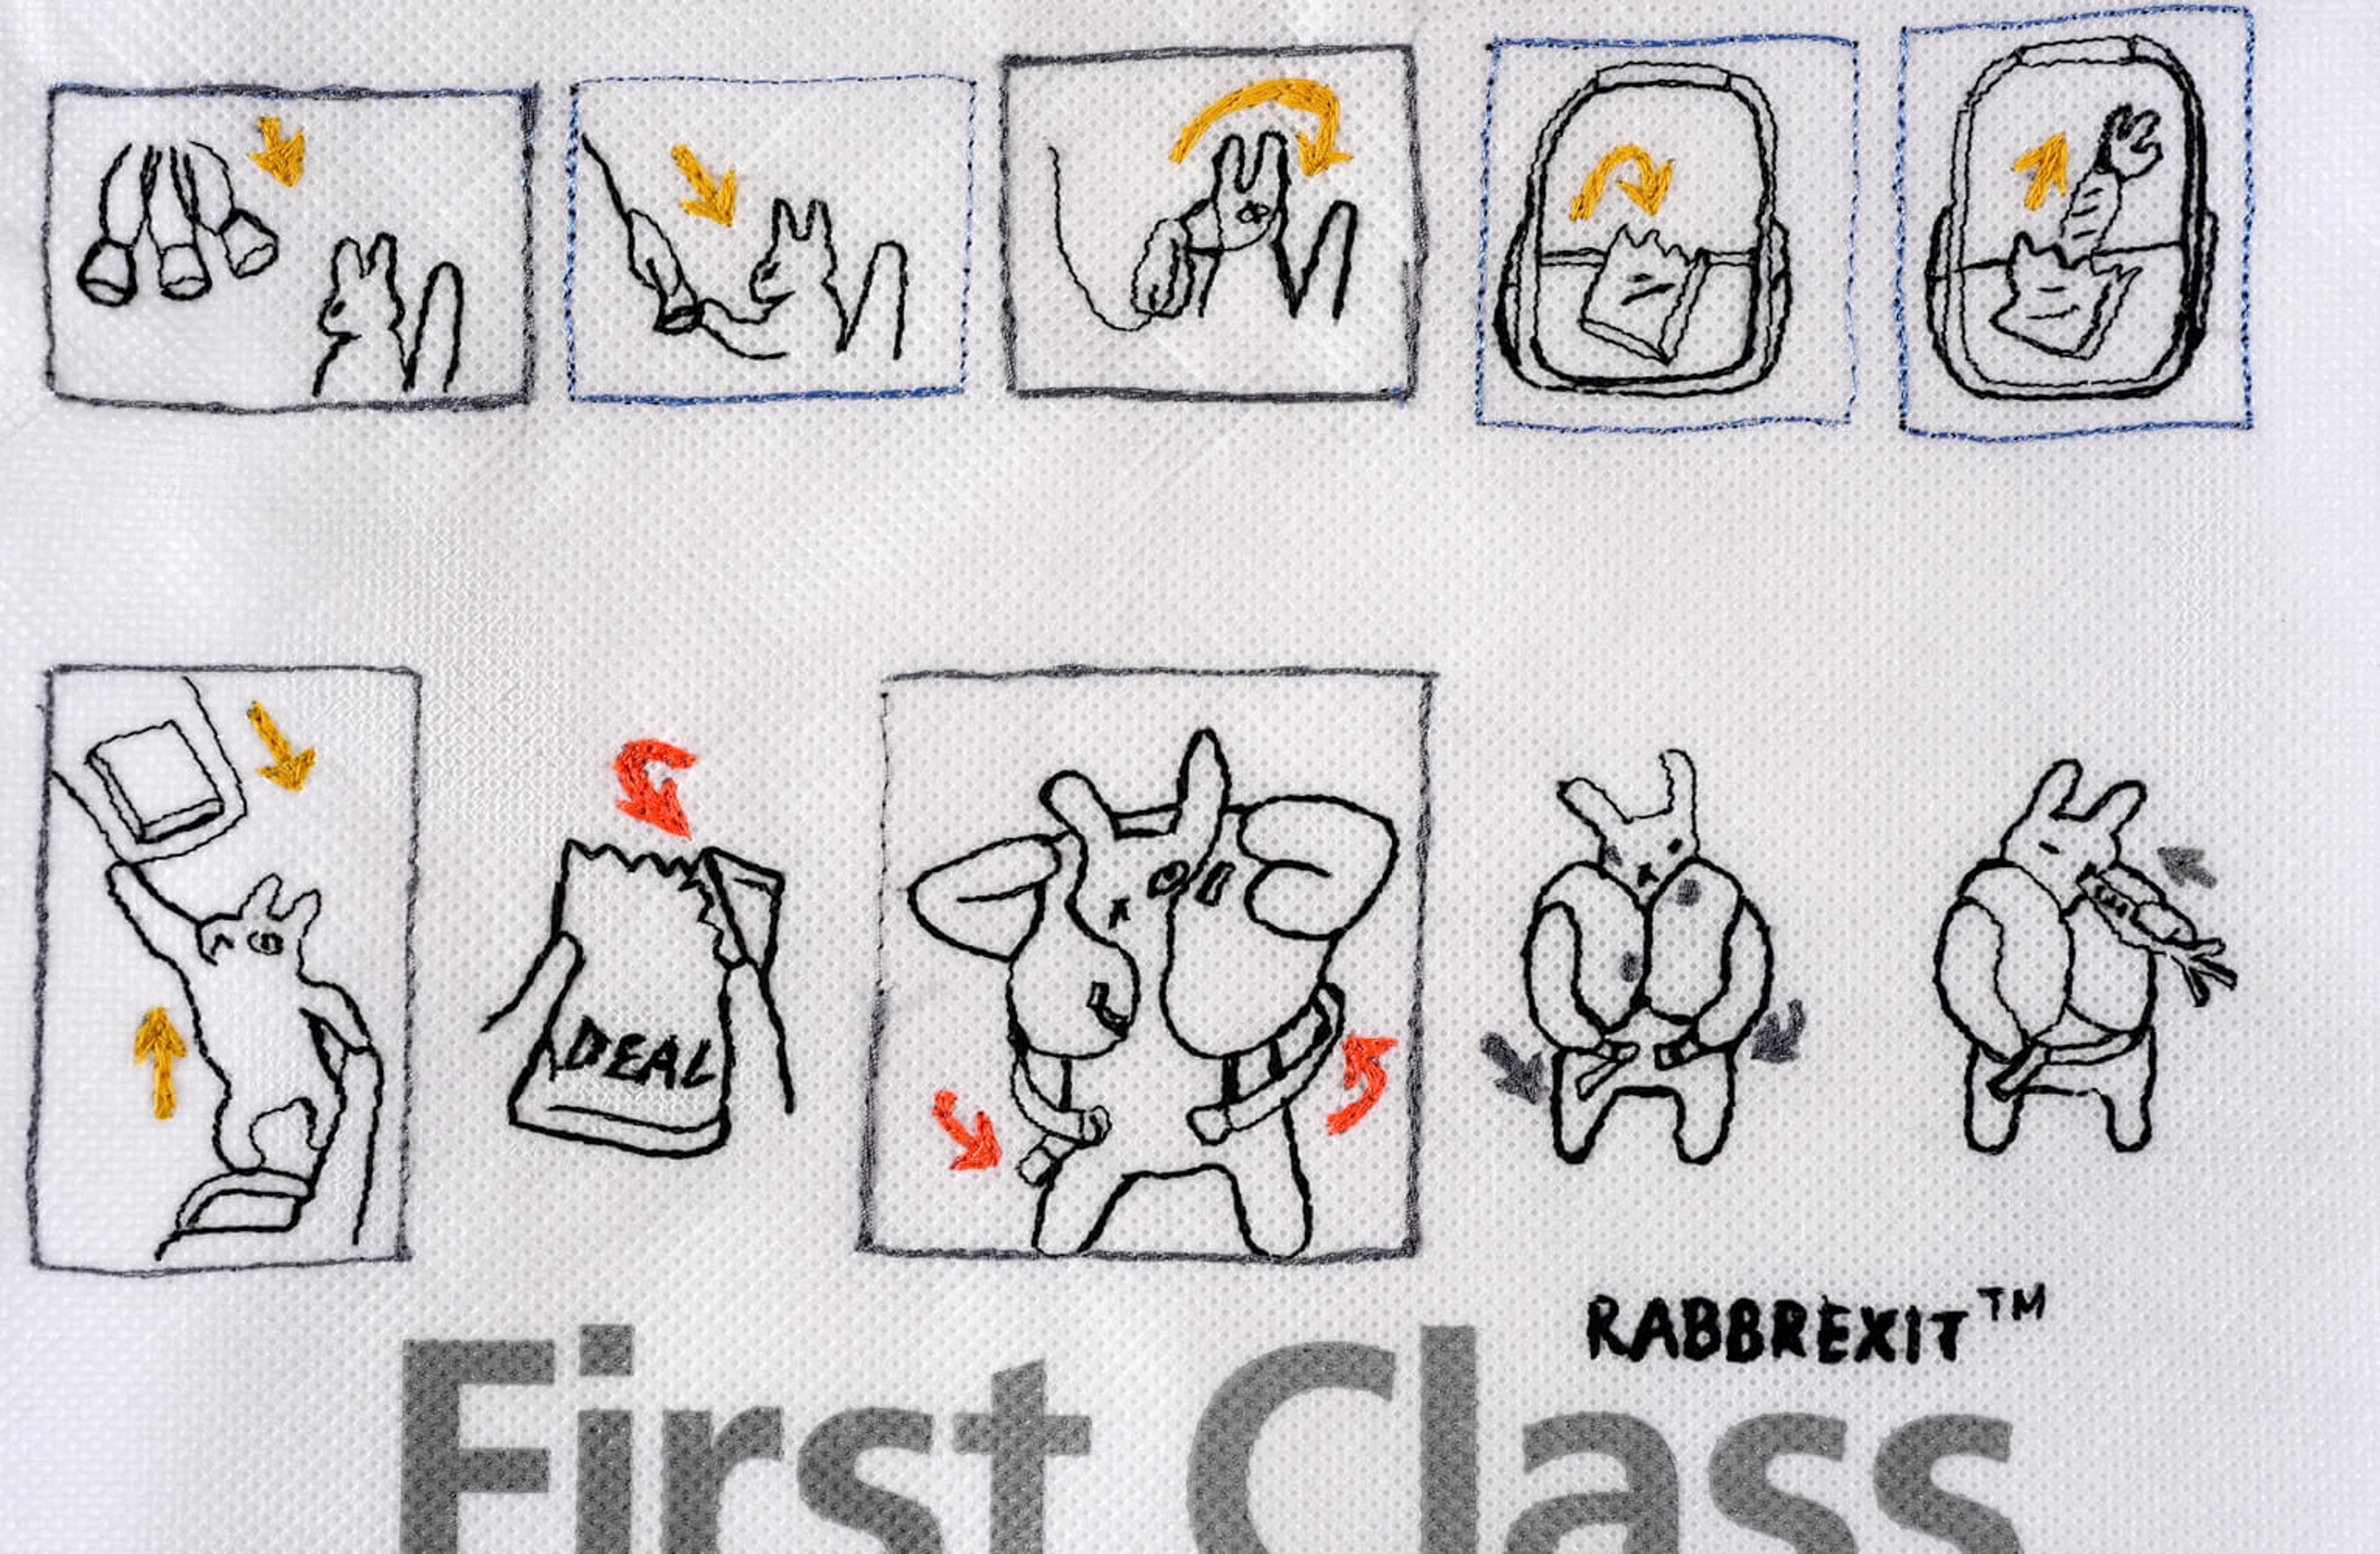 An embroidered comic of a rabbit enacting aeroplane safety protocol